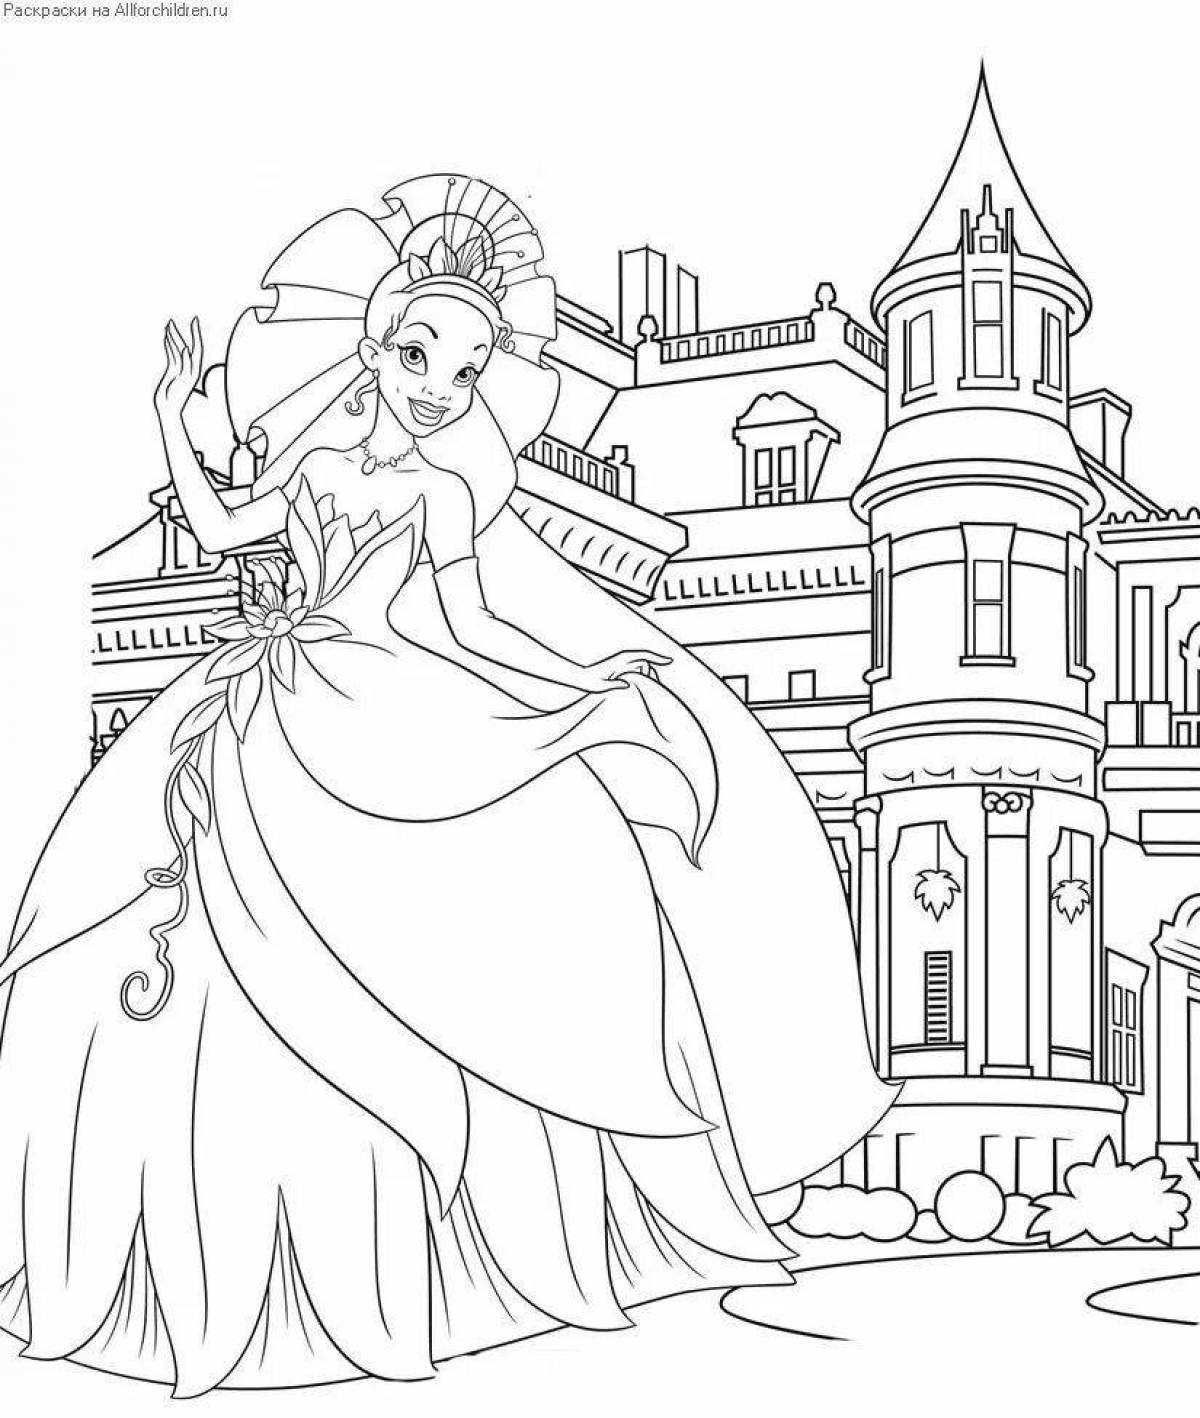 Dreamy castle coloring book for girls